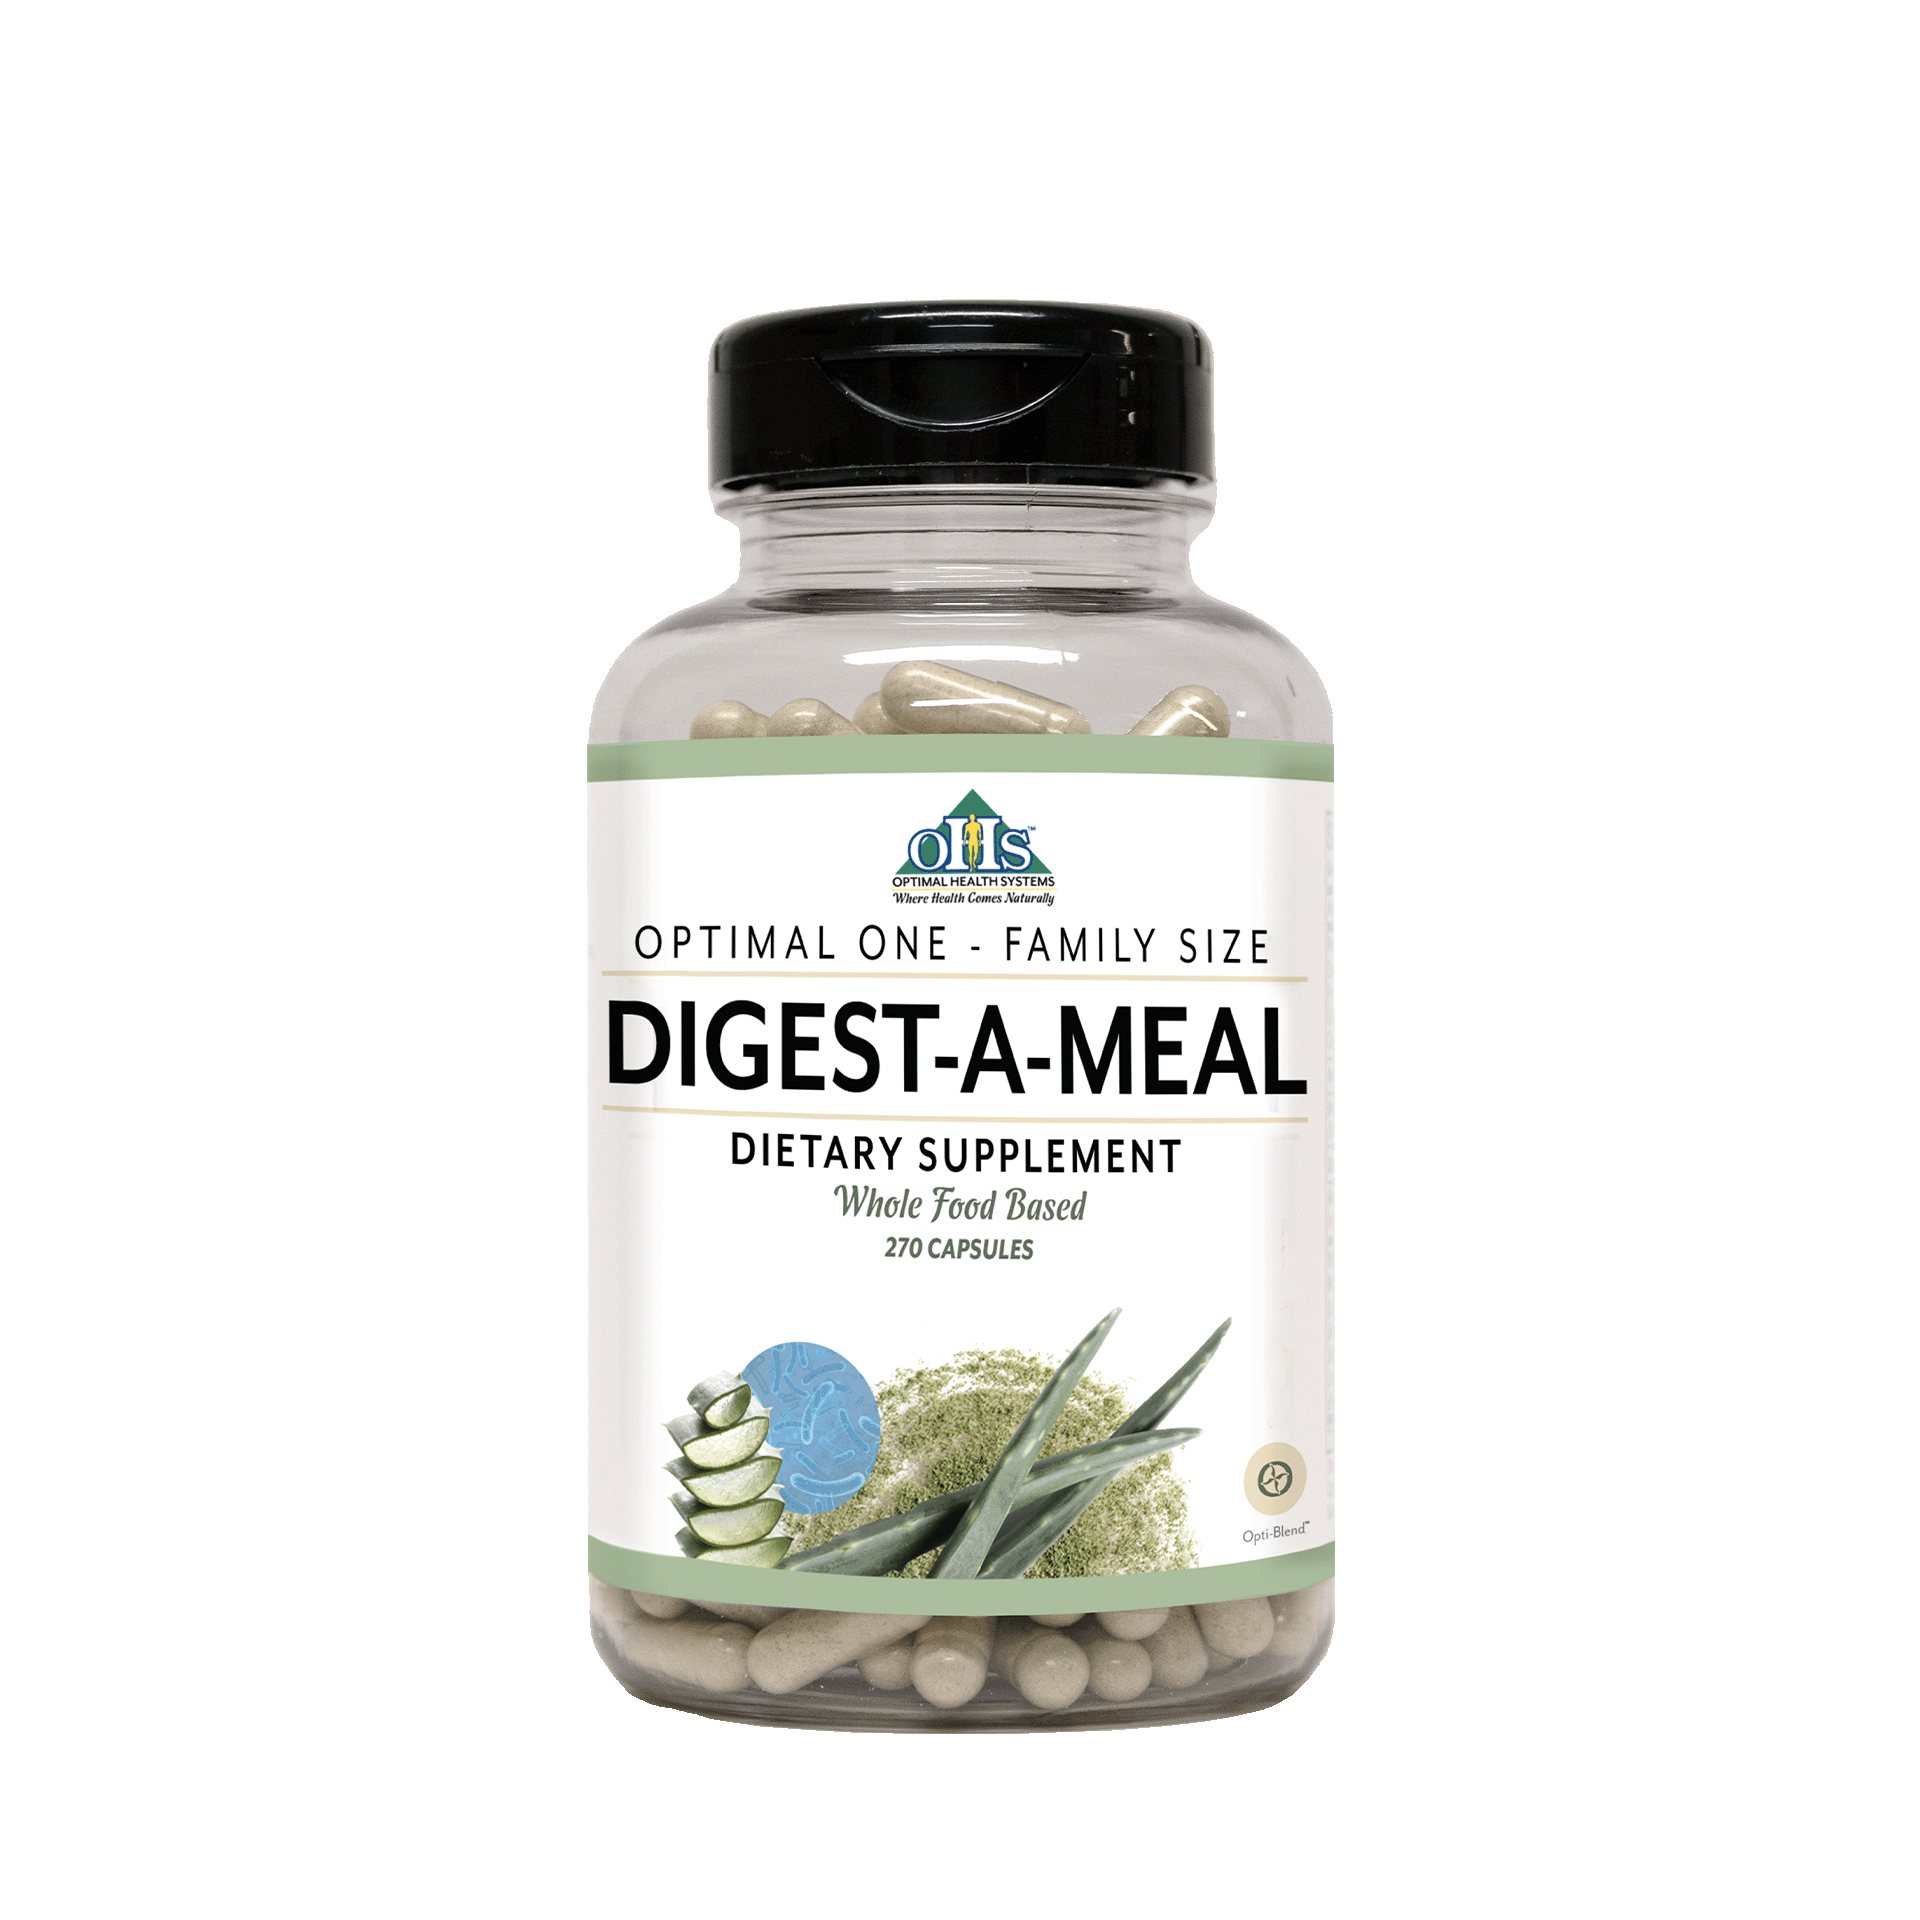 Image of a bottle of Optimal One Digest-A-Meal family size.